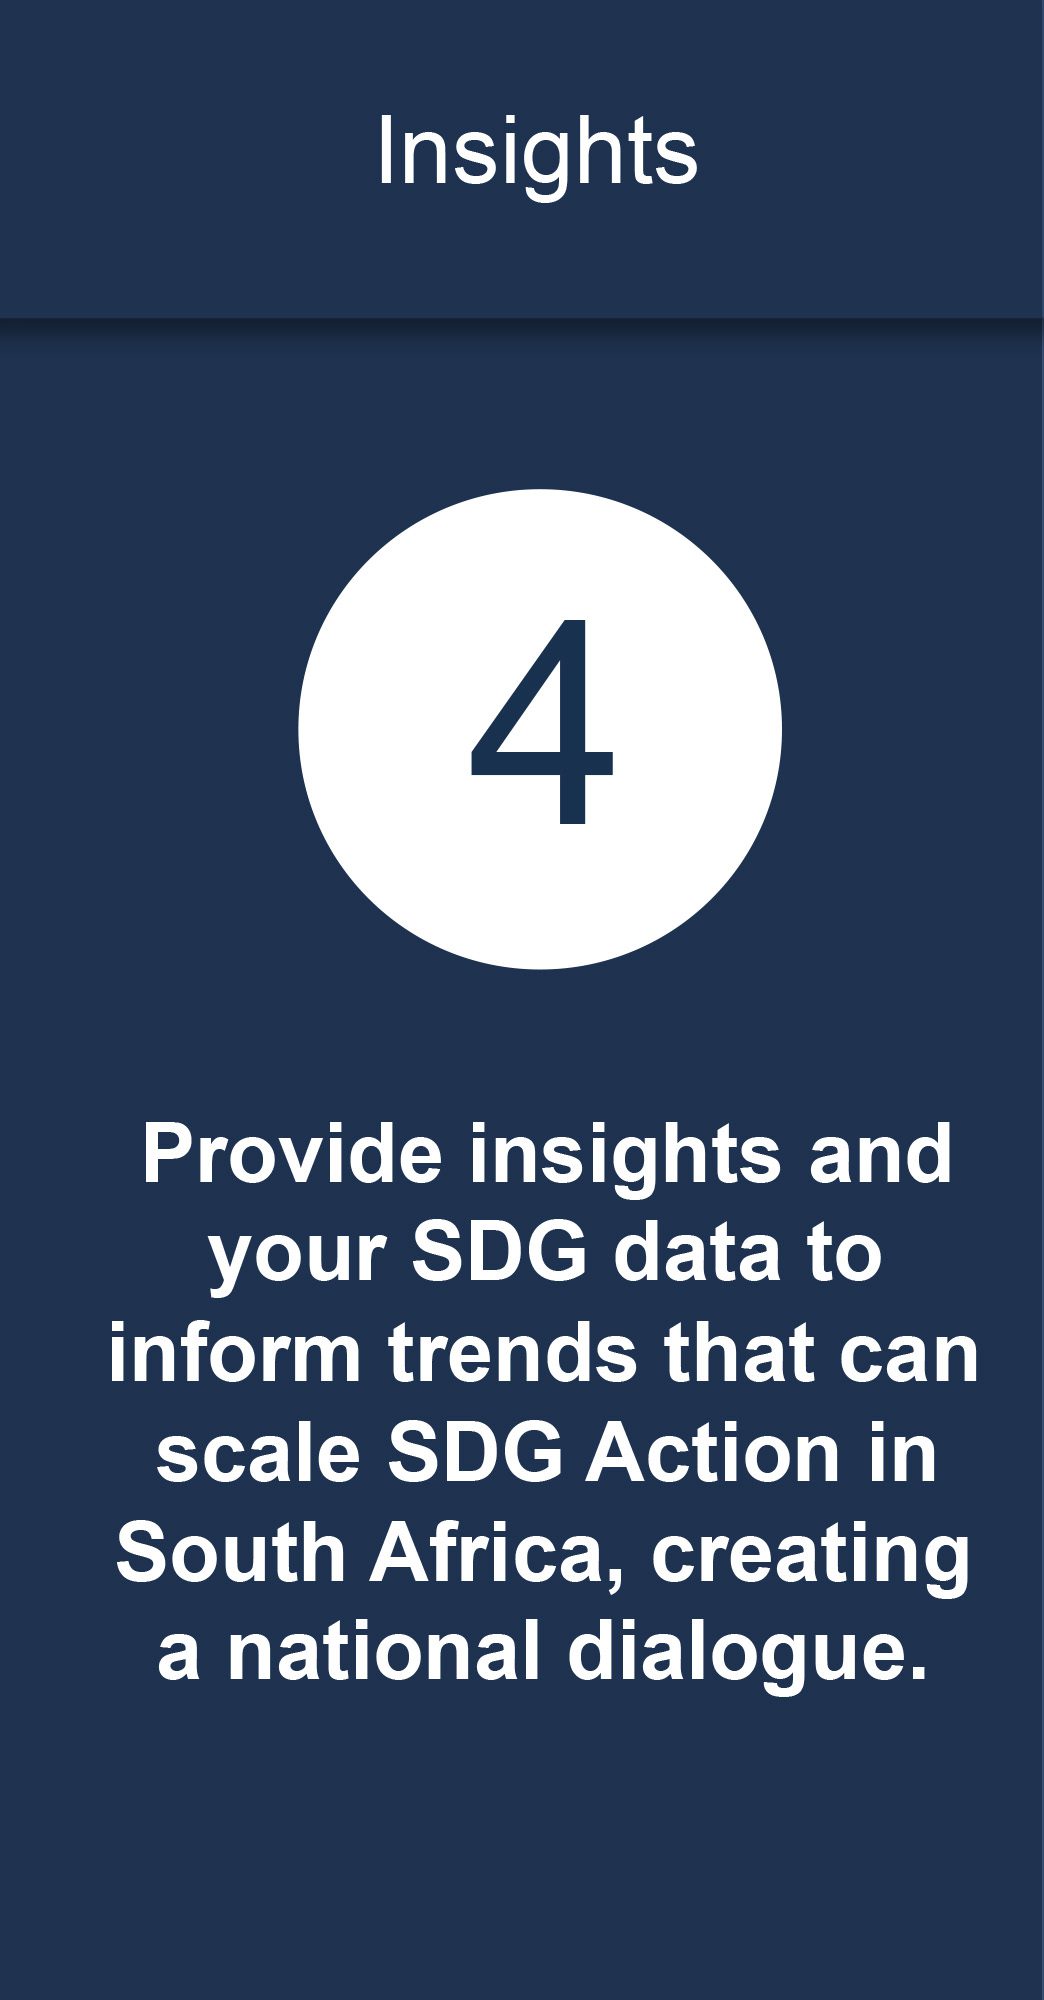 Provide insights and your SDG data to inform trends that can scale SDG Action in South Africa, creating a national dialogue.